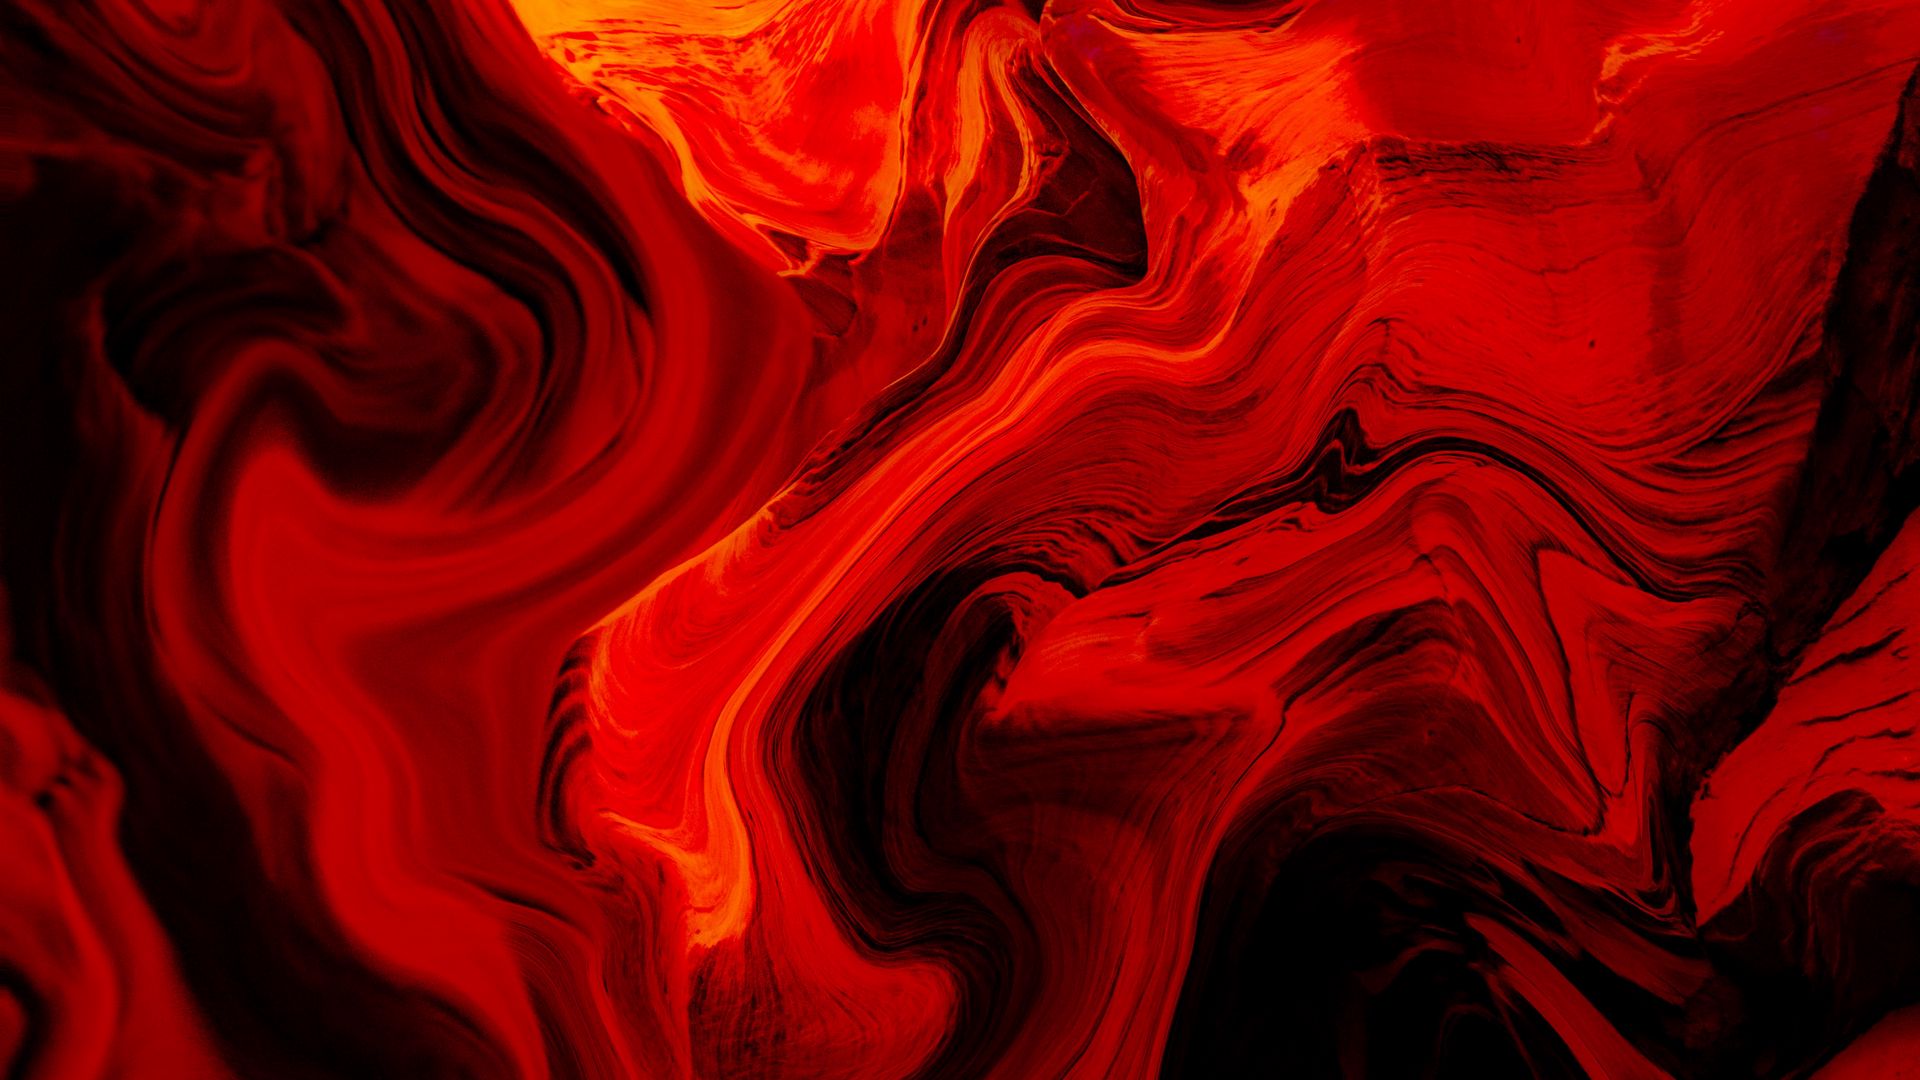 Download wallpaper 1920x1080 paint, stains, mixing, liquid, abstraction ...